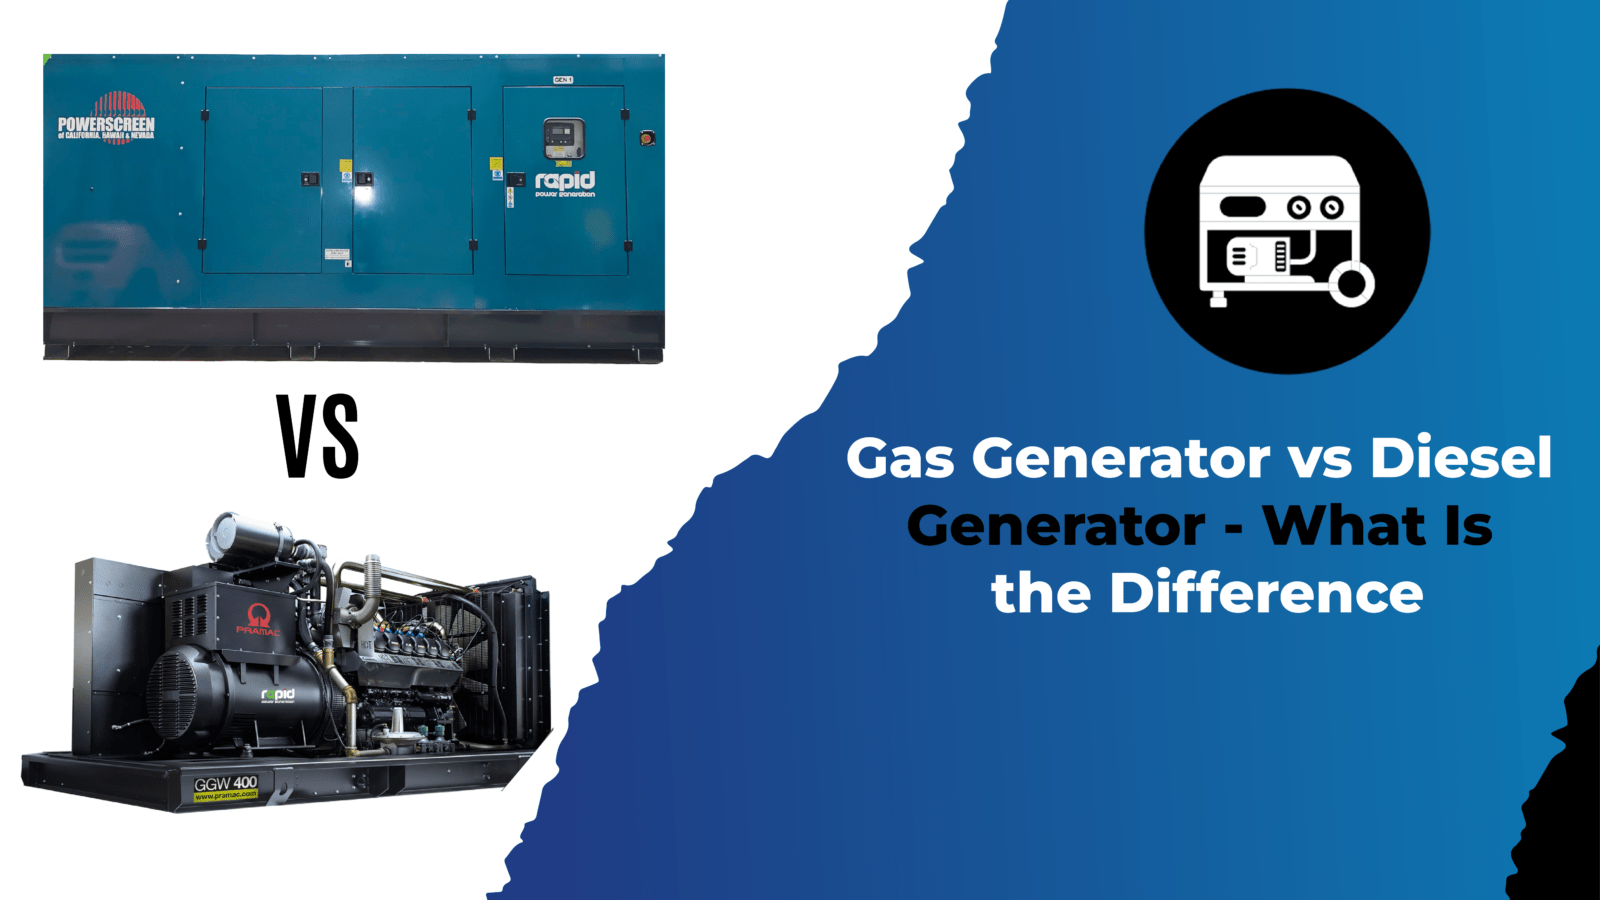 Gas Generator vs Diesel Generator - What Is the Difference